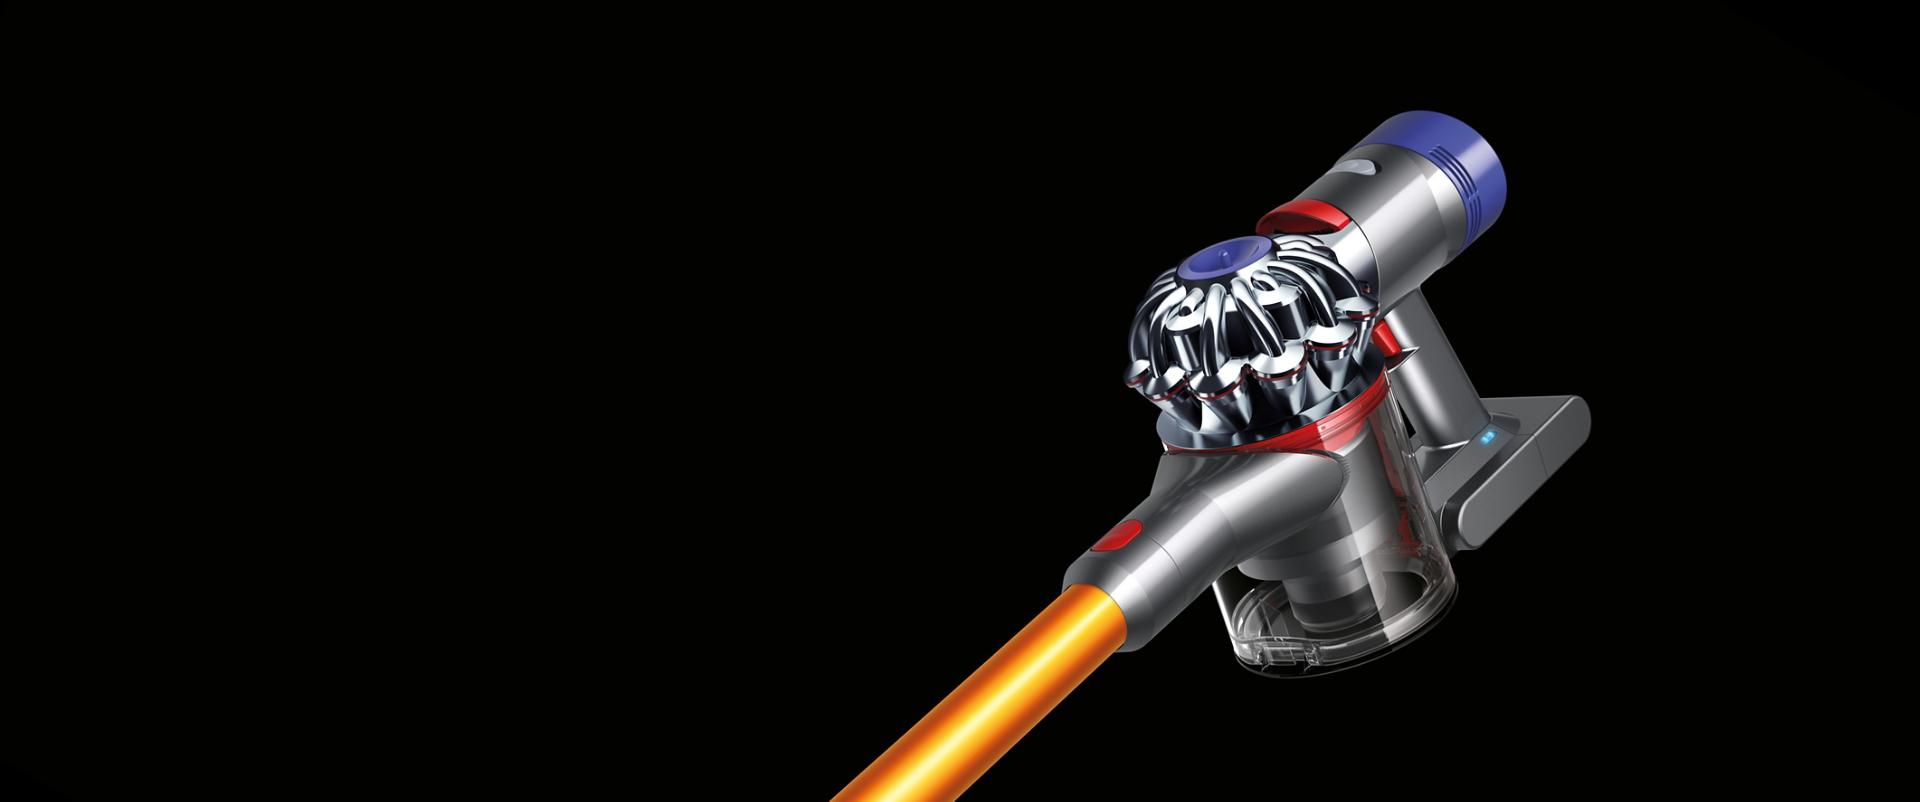 The Dyson V8 vacuum cleaner